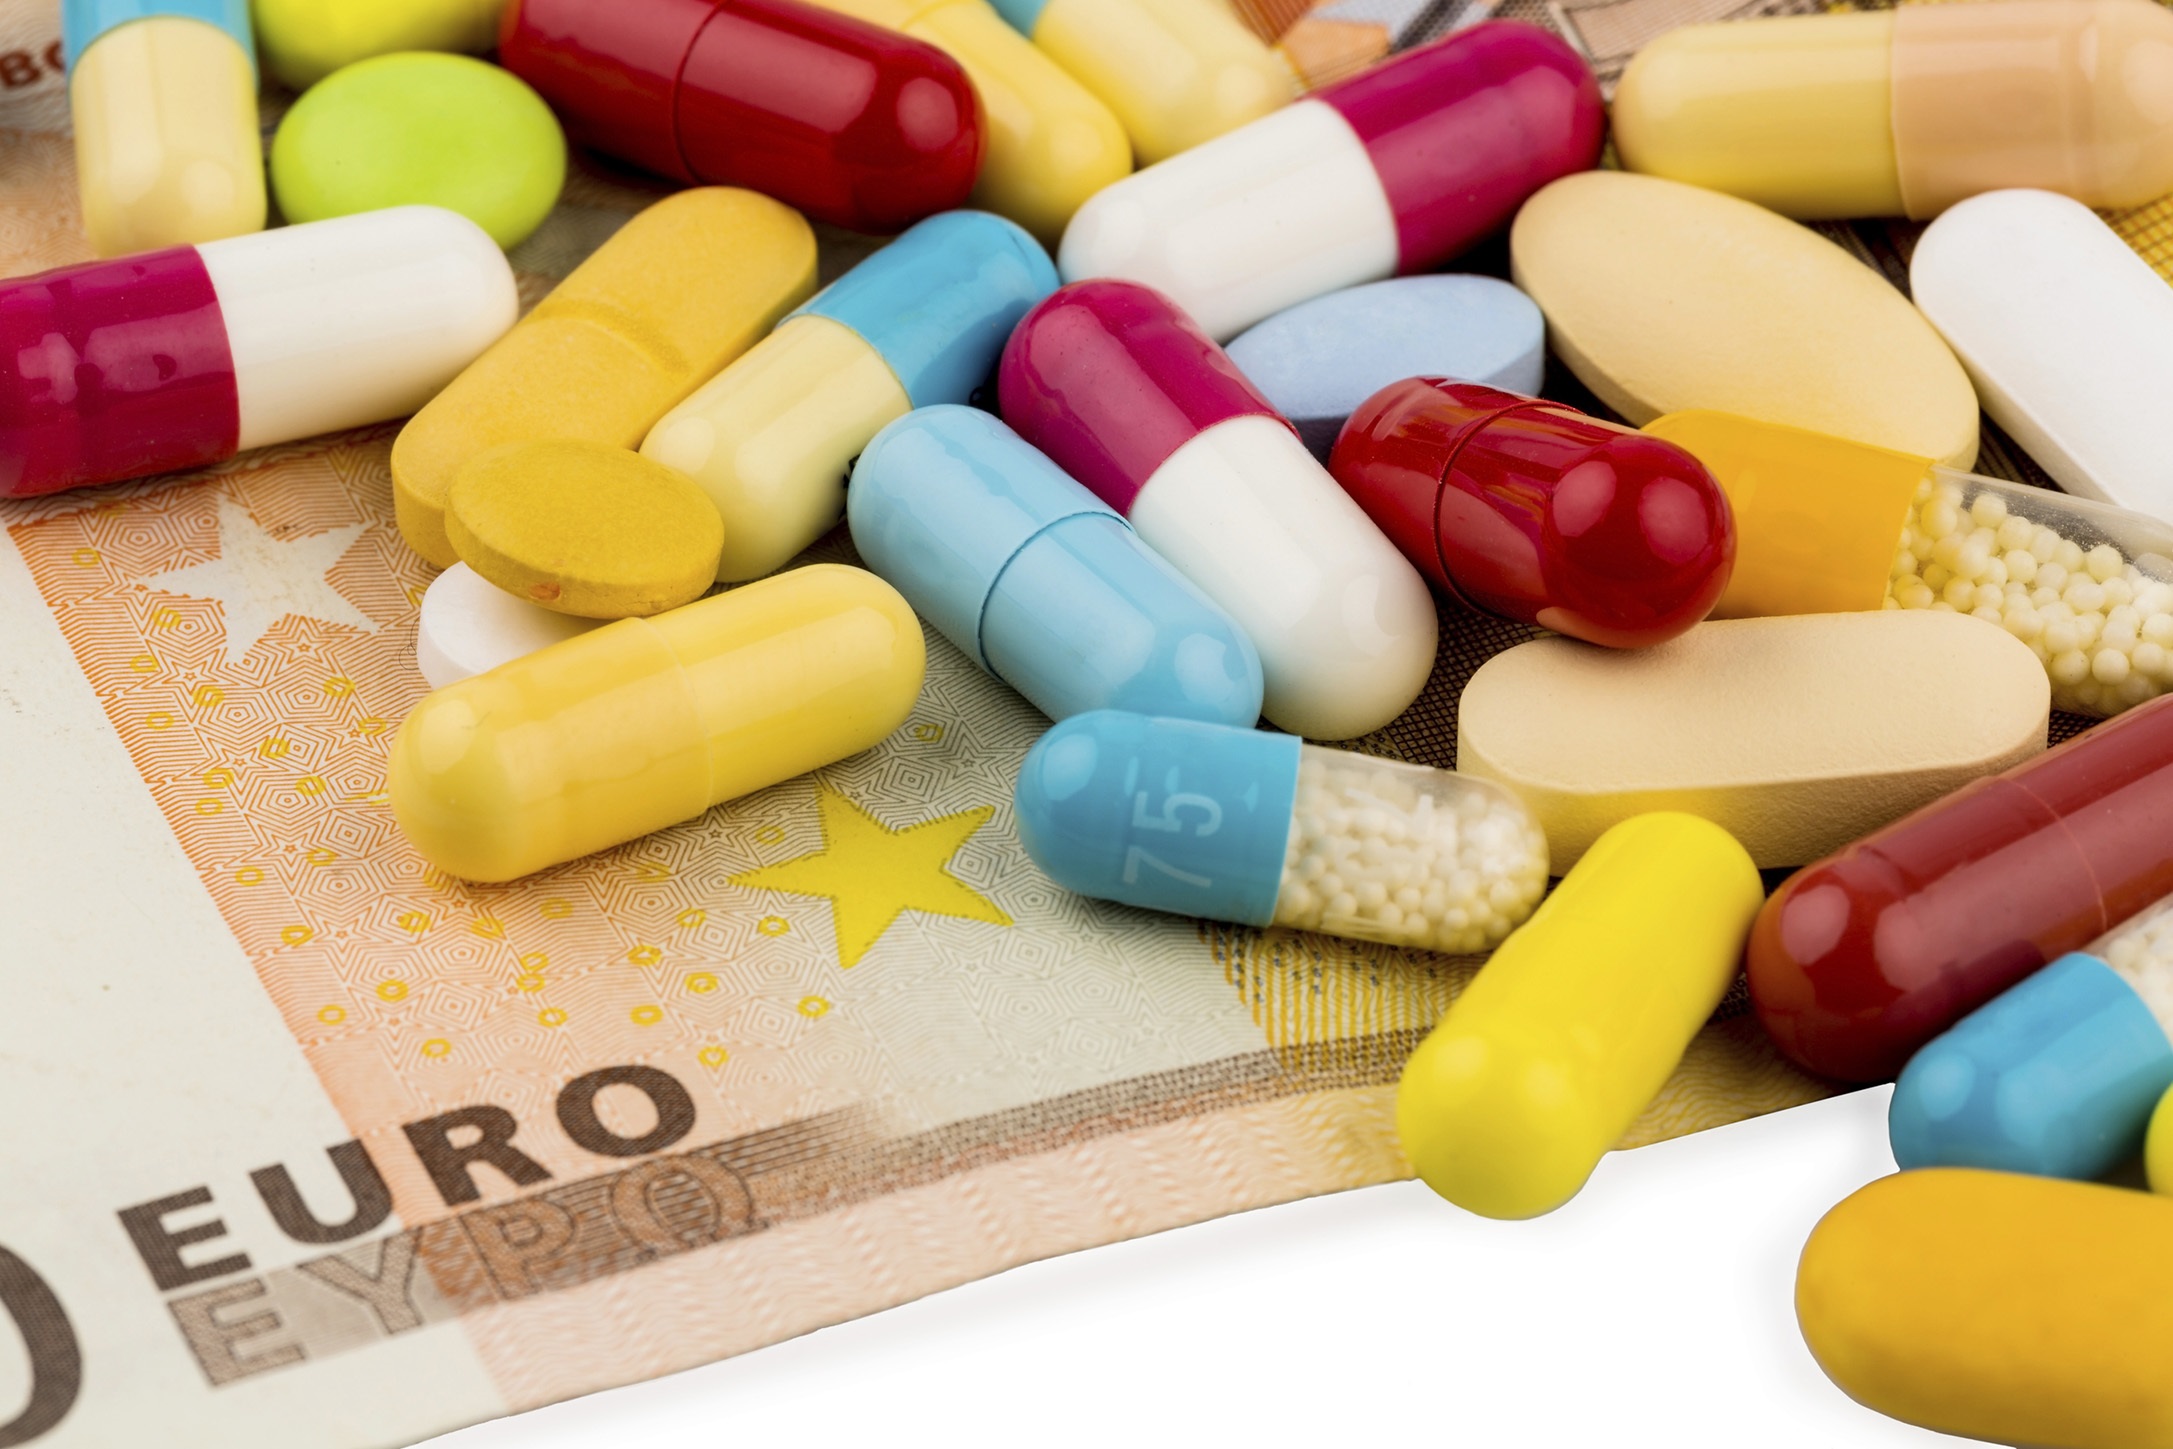 euro notes and tablets, symbol photo for costs of medicines and health insurance.